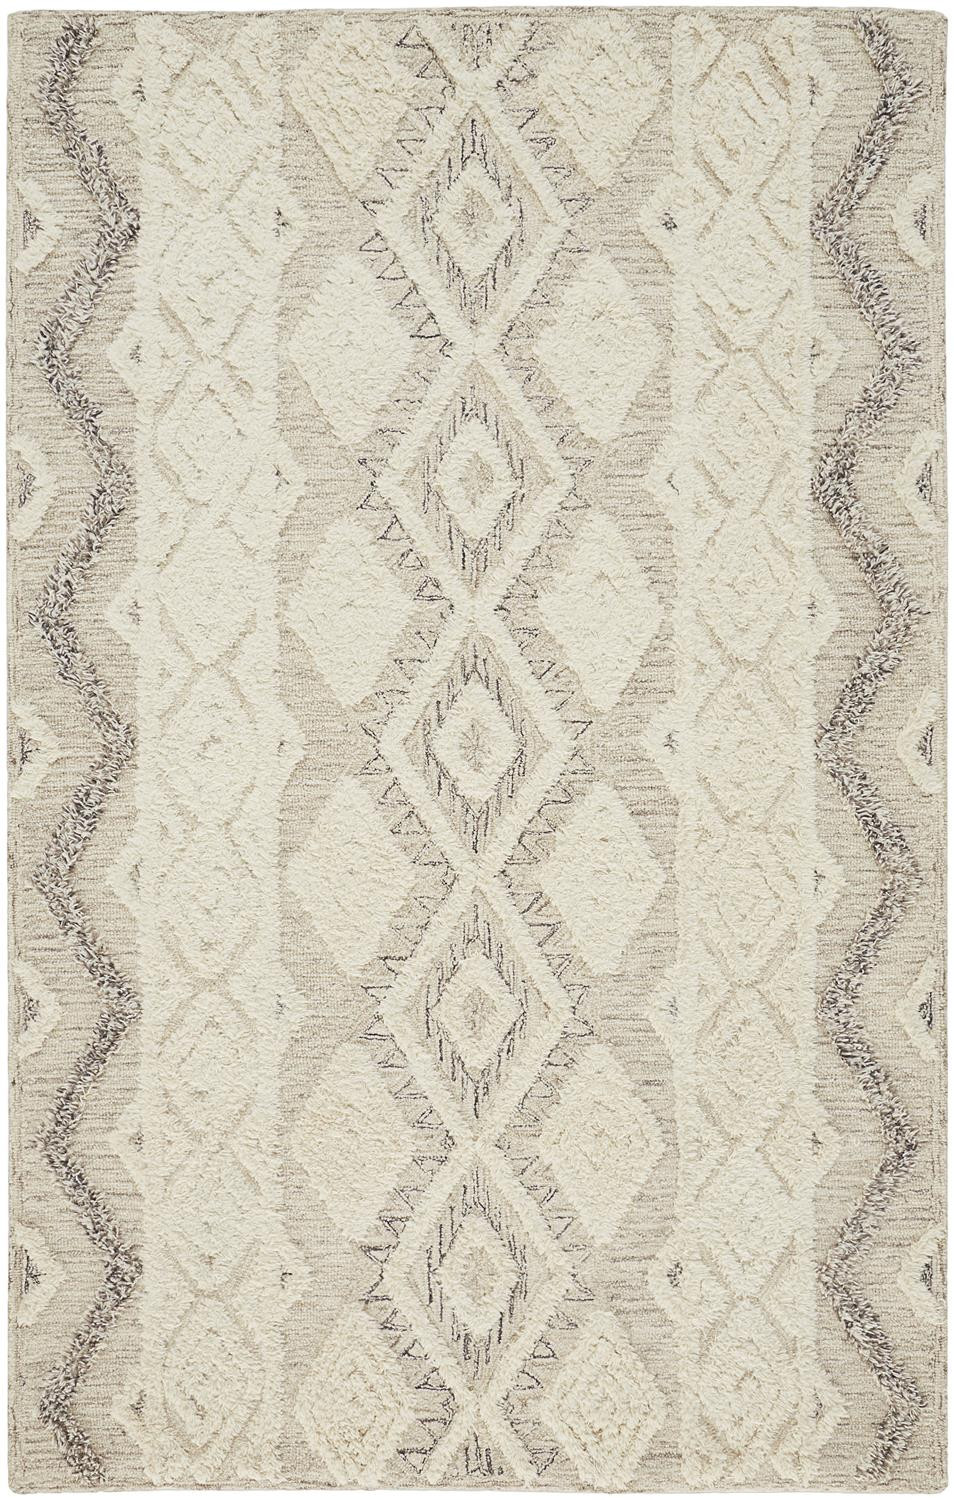 5' X 8' Ivory Taupe And Gray Wool Geometric Tufted Handmade Stain Resistant Area Rug-512775-1